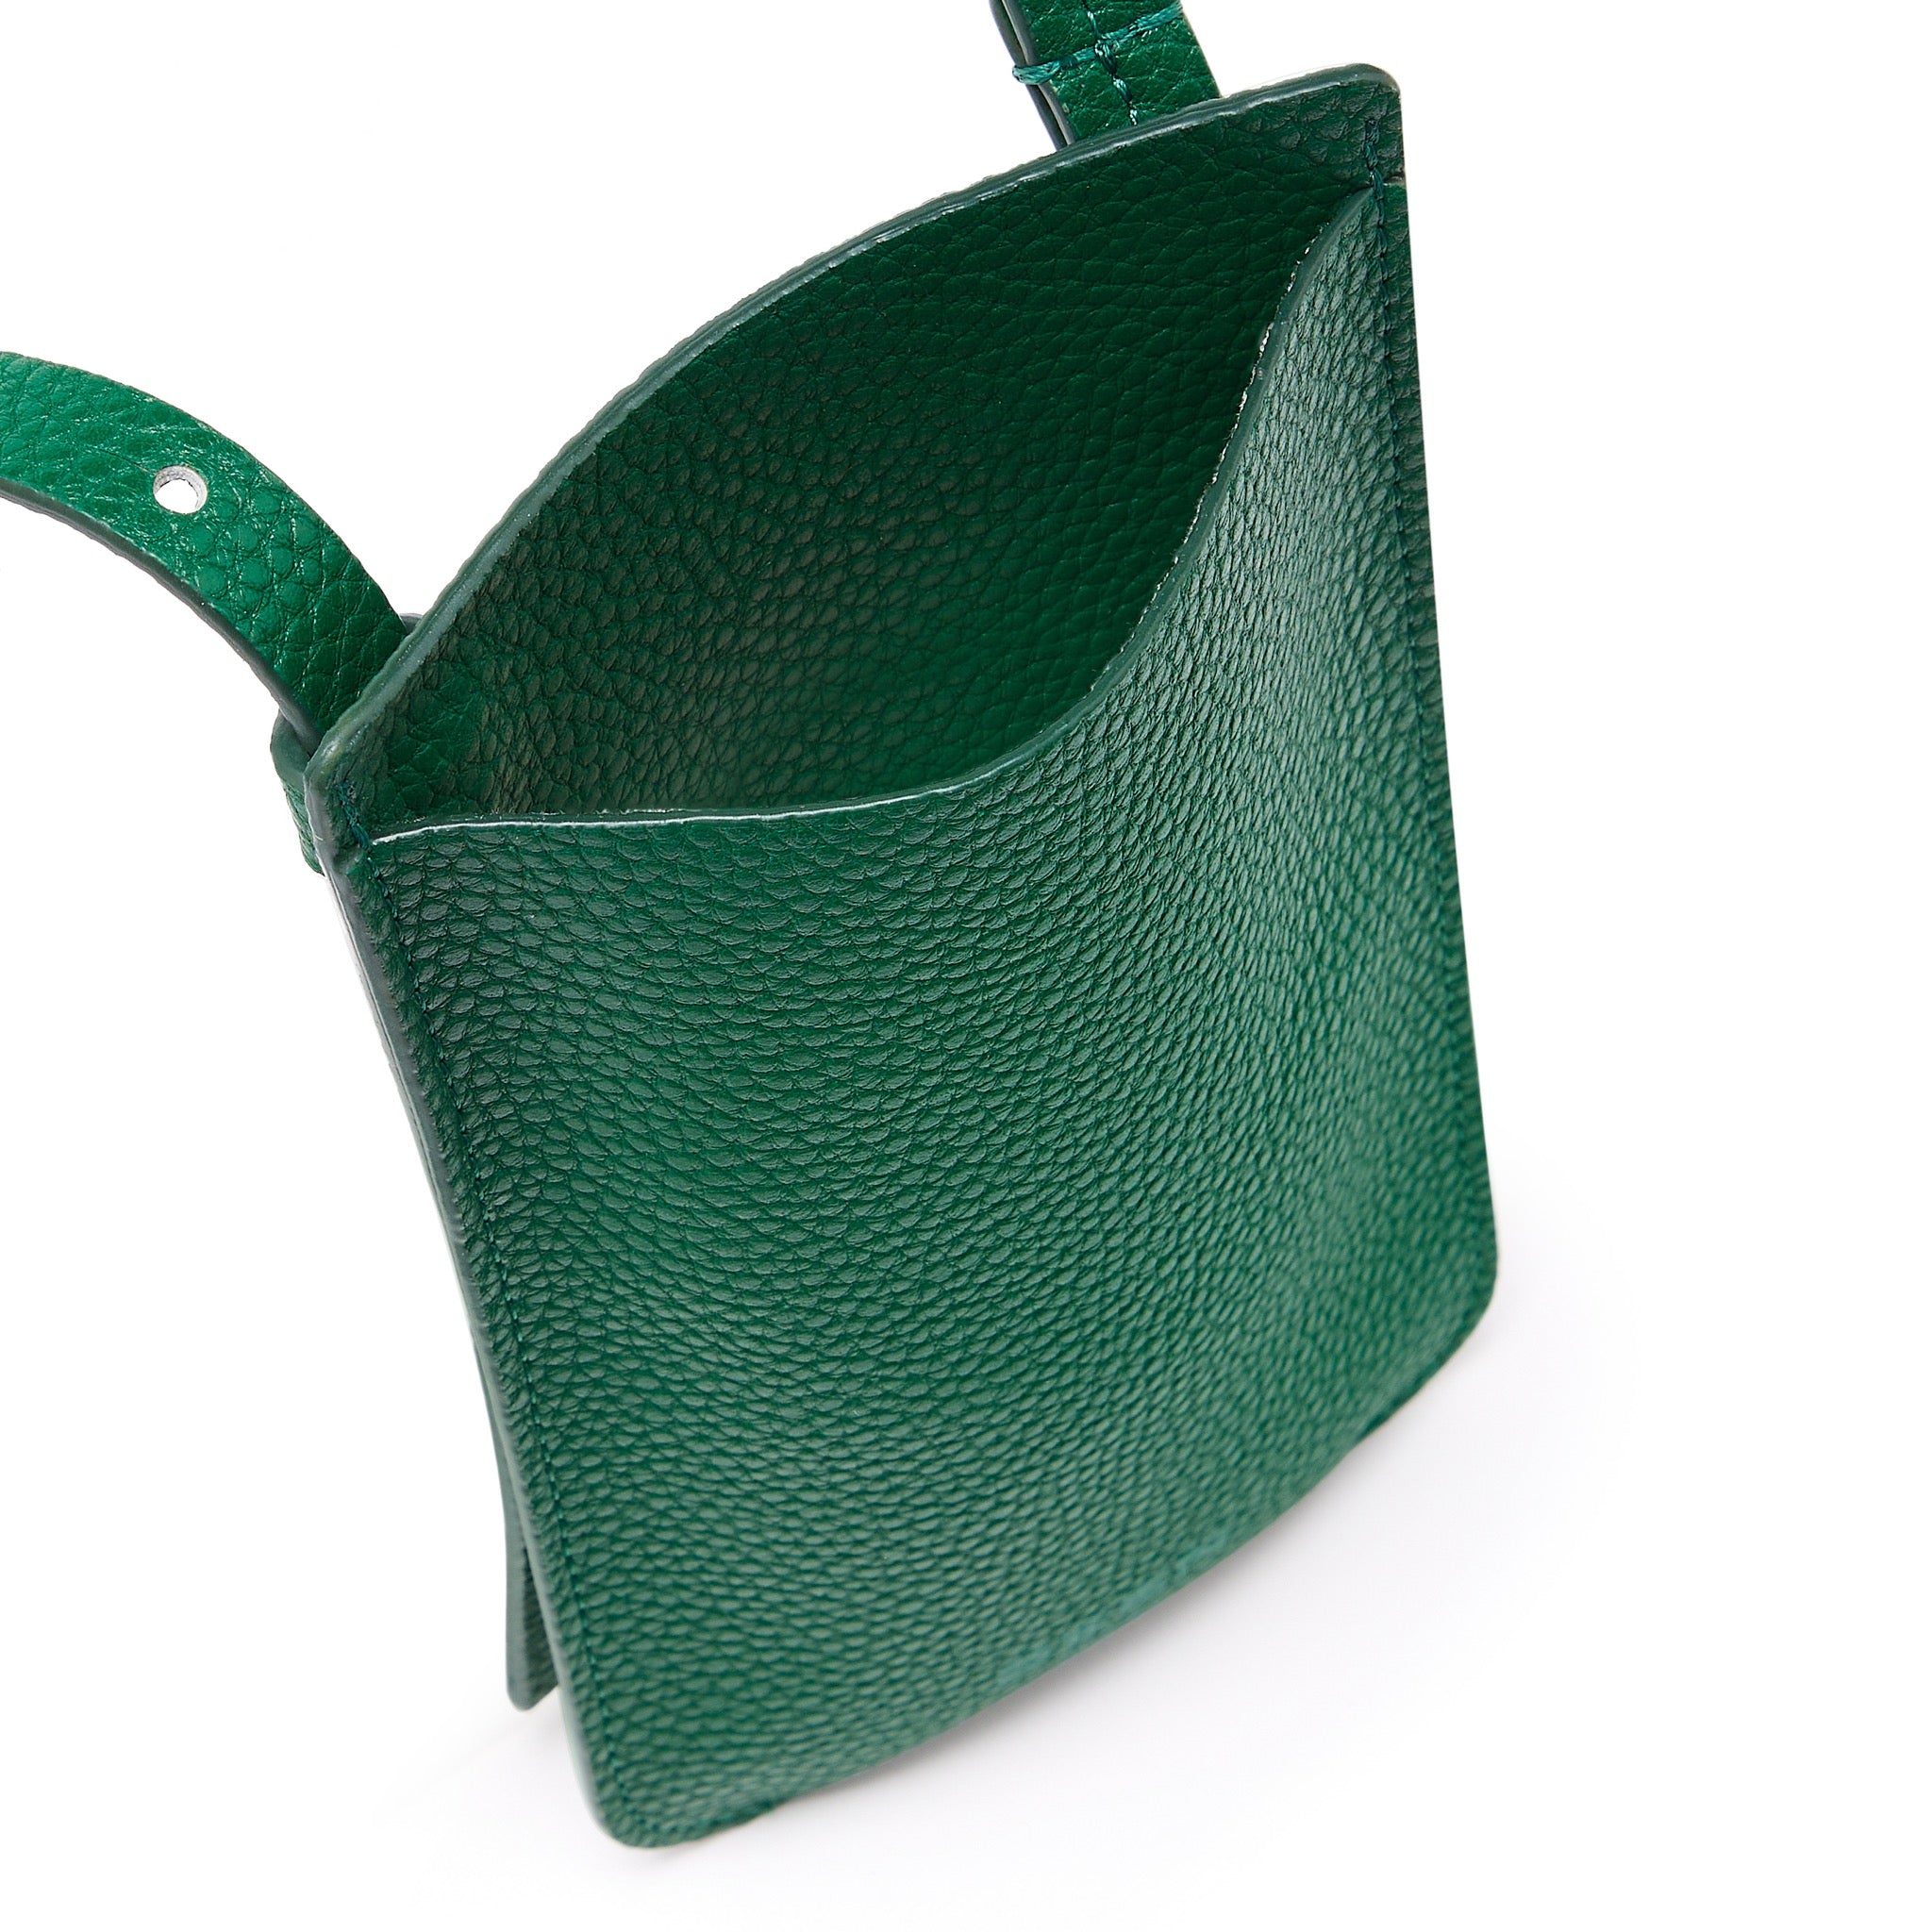 Elia Phone Bag in Rainforest Green recycled pebbled leather spacious interior 